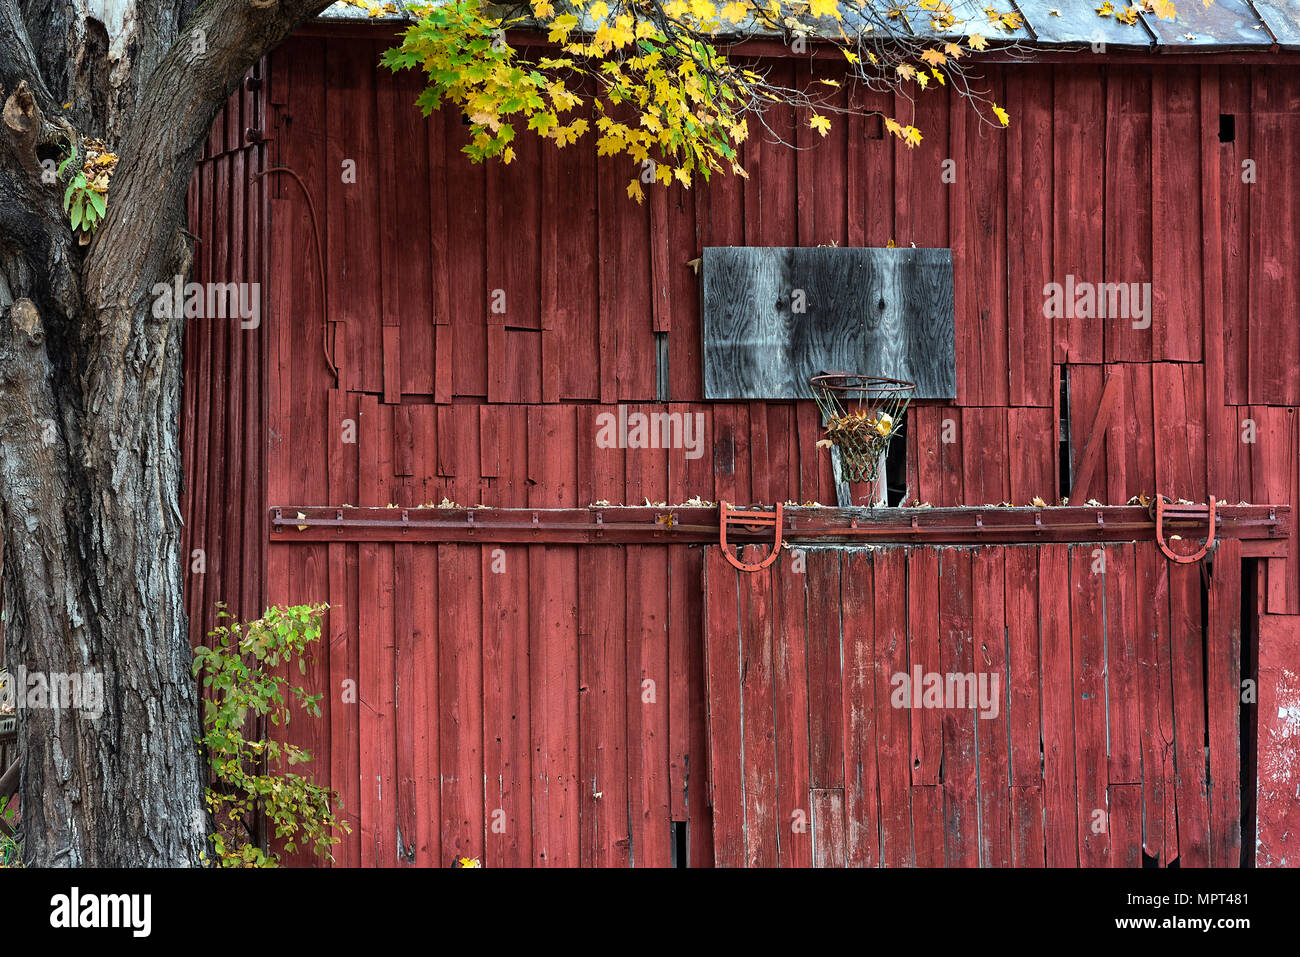 An neglected basketball hoop mounted on a rural red barn, New York, USA. Stock Photo